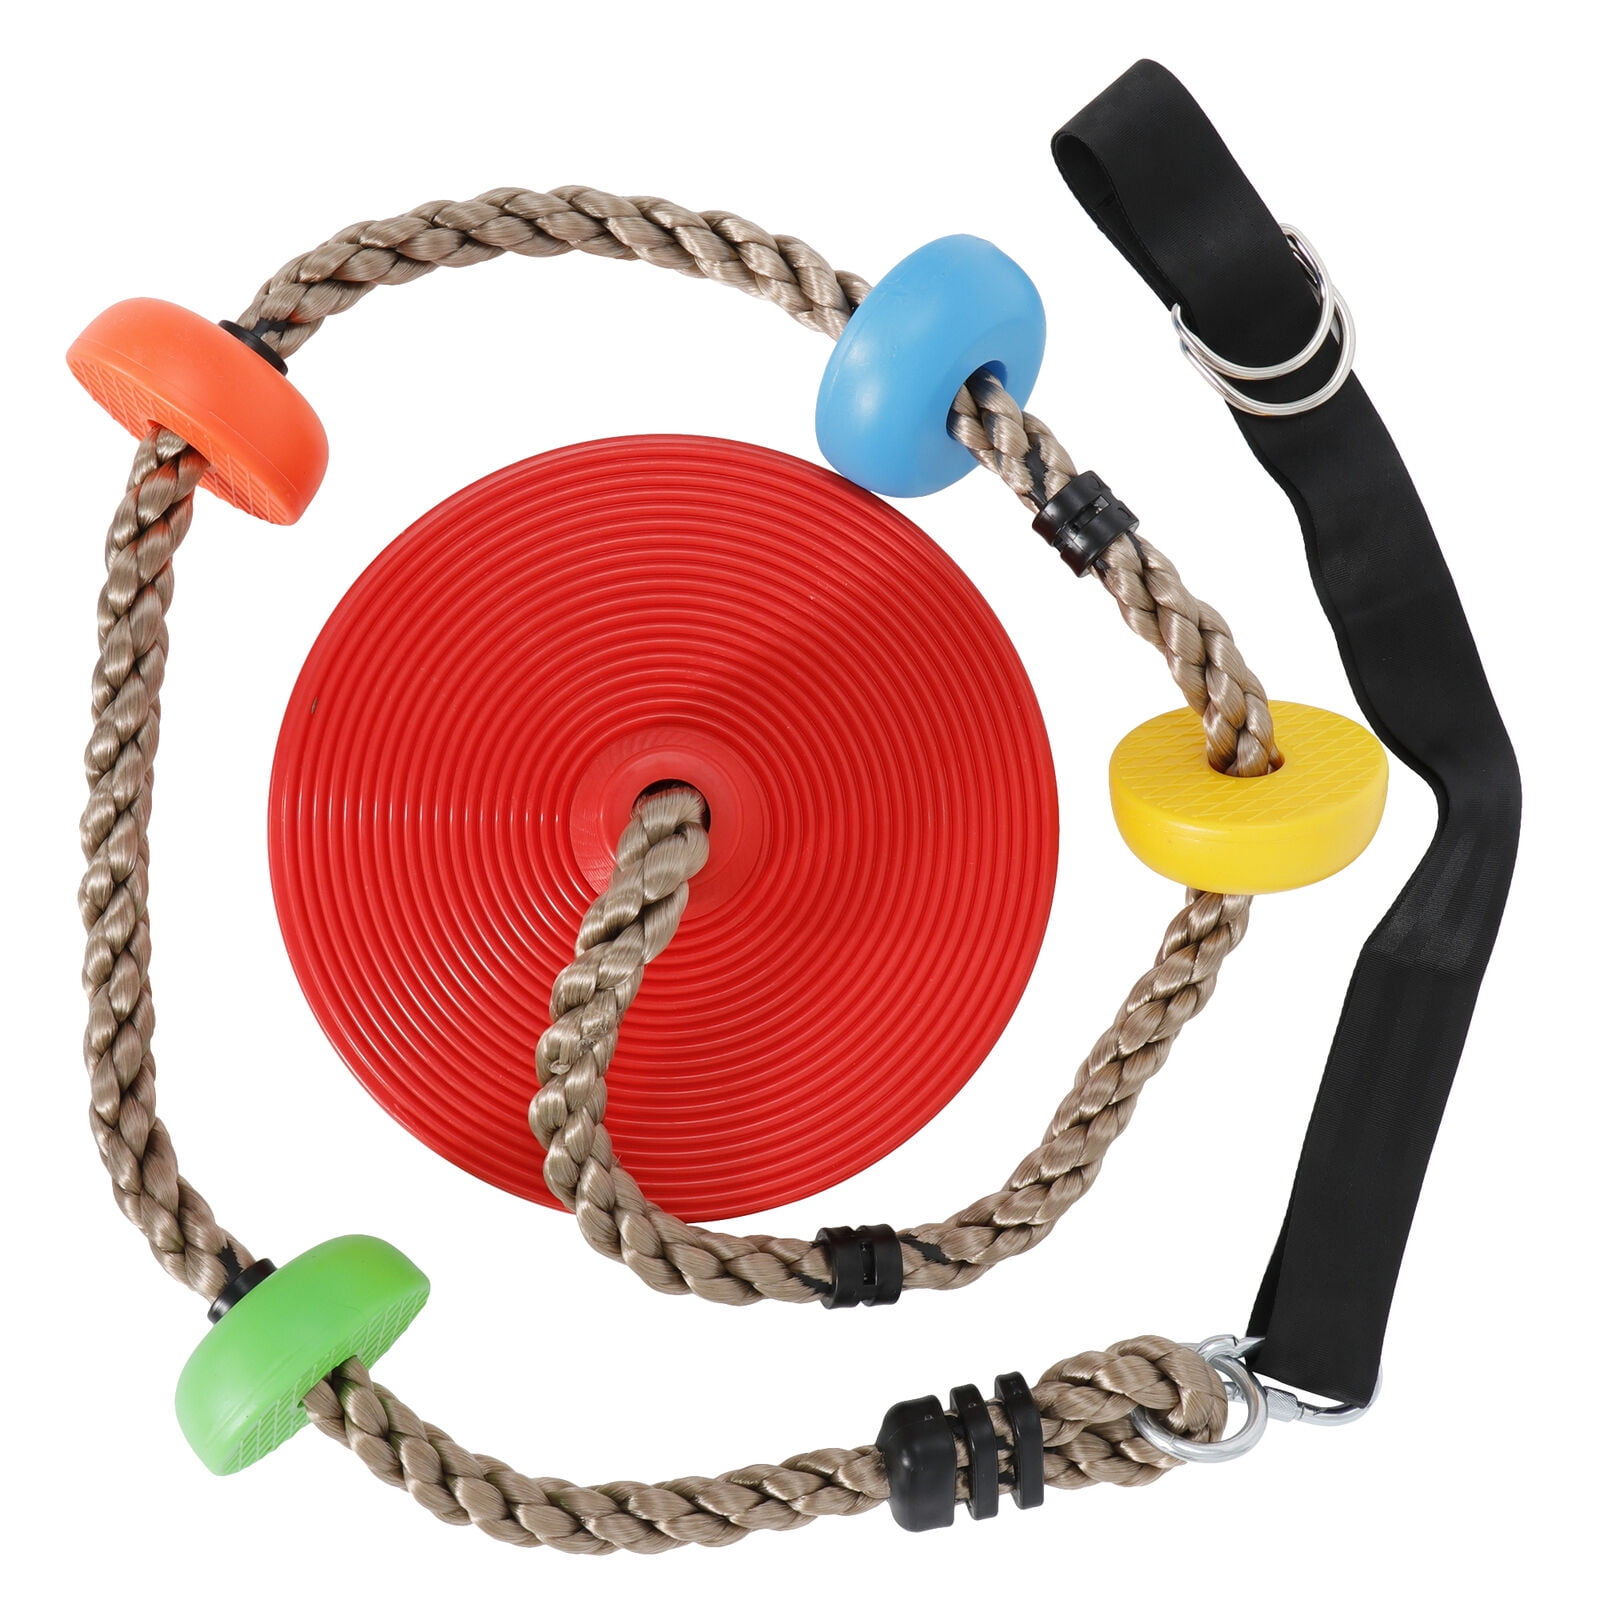 Details about   Kingdom Climbing Rope with Platforms and Disc Swing Seat Set with Hanging Strap 